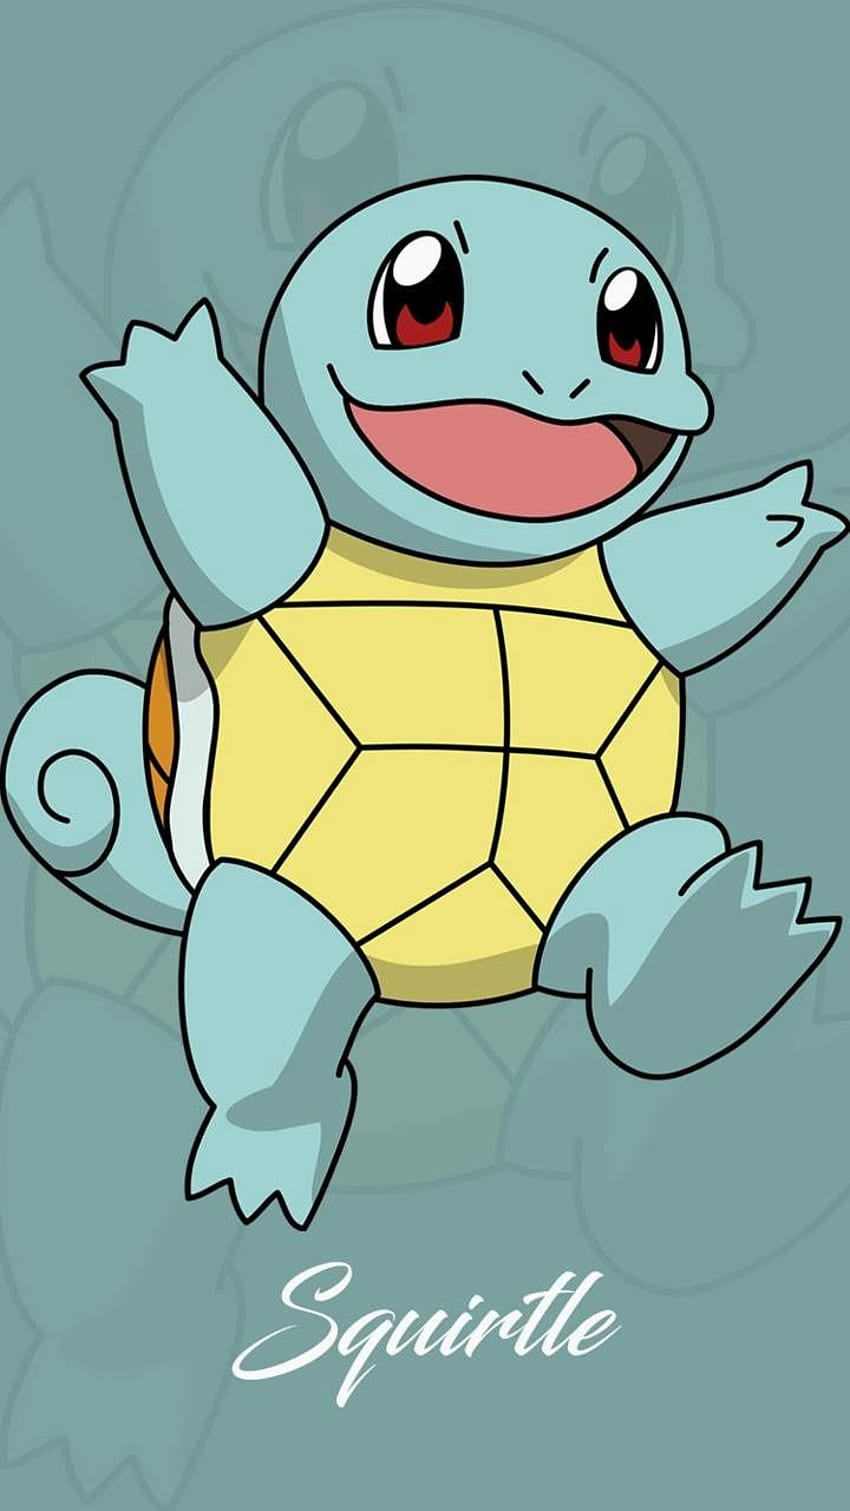 Squirtle - Pokemon Squirtle -, Squirtle Squad Tapeta na telefon HD